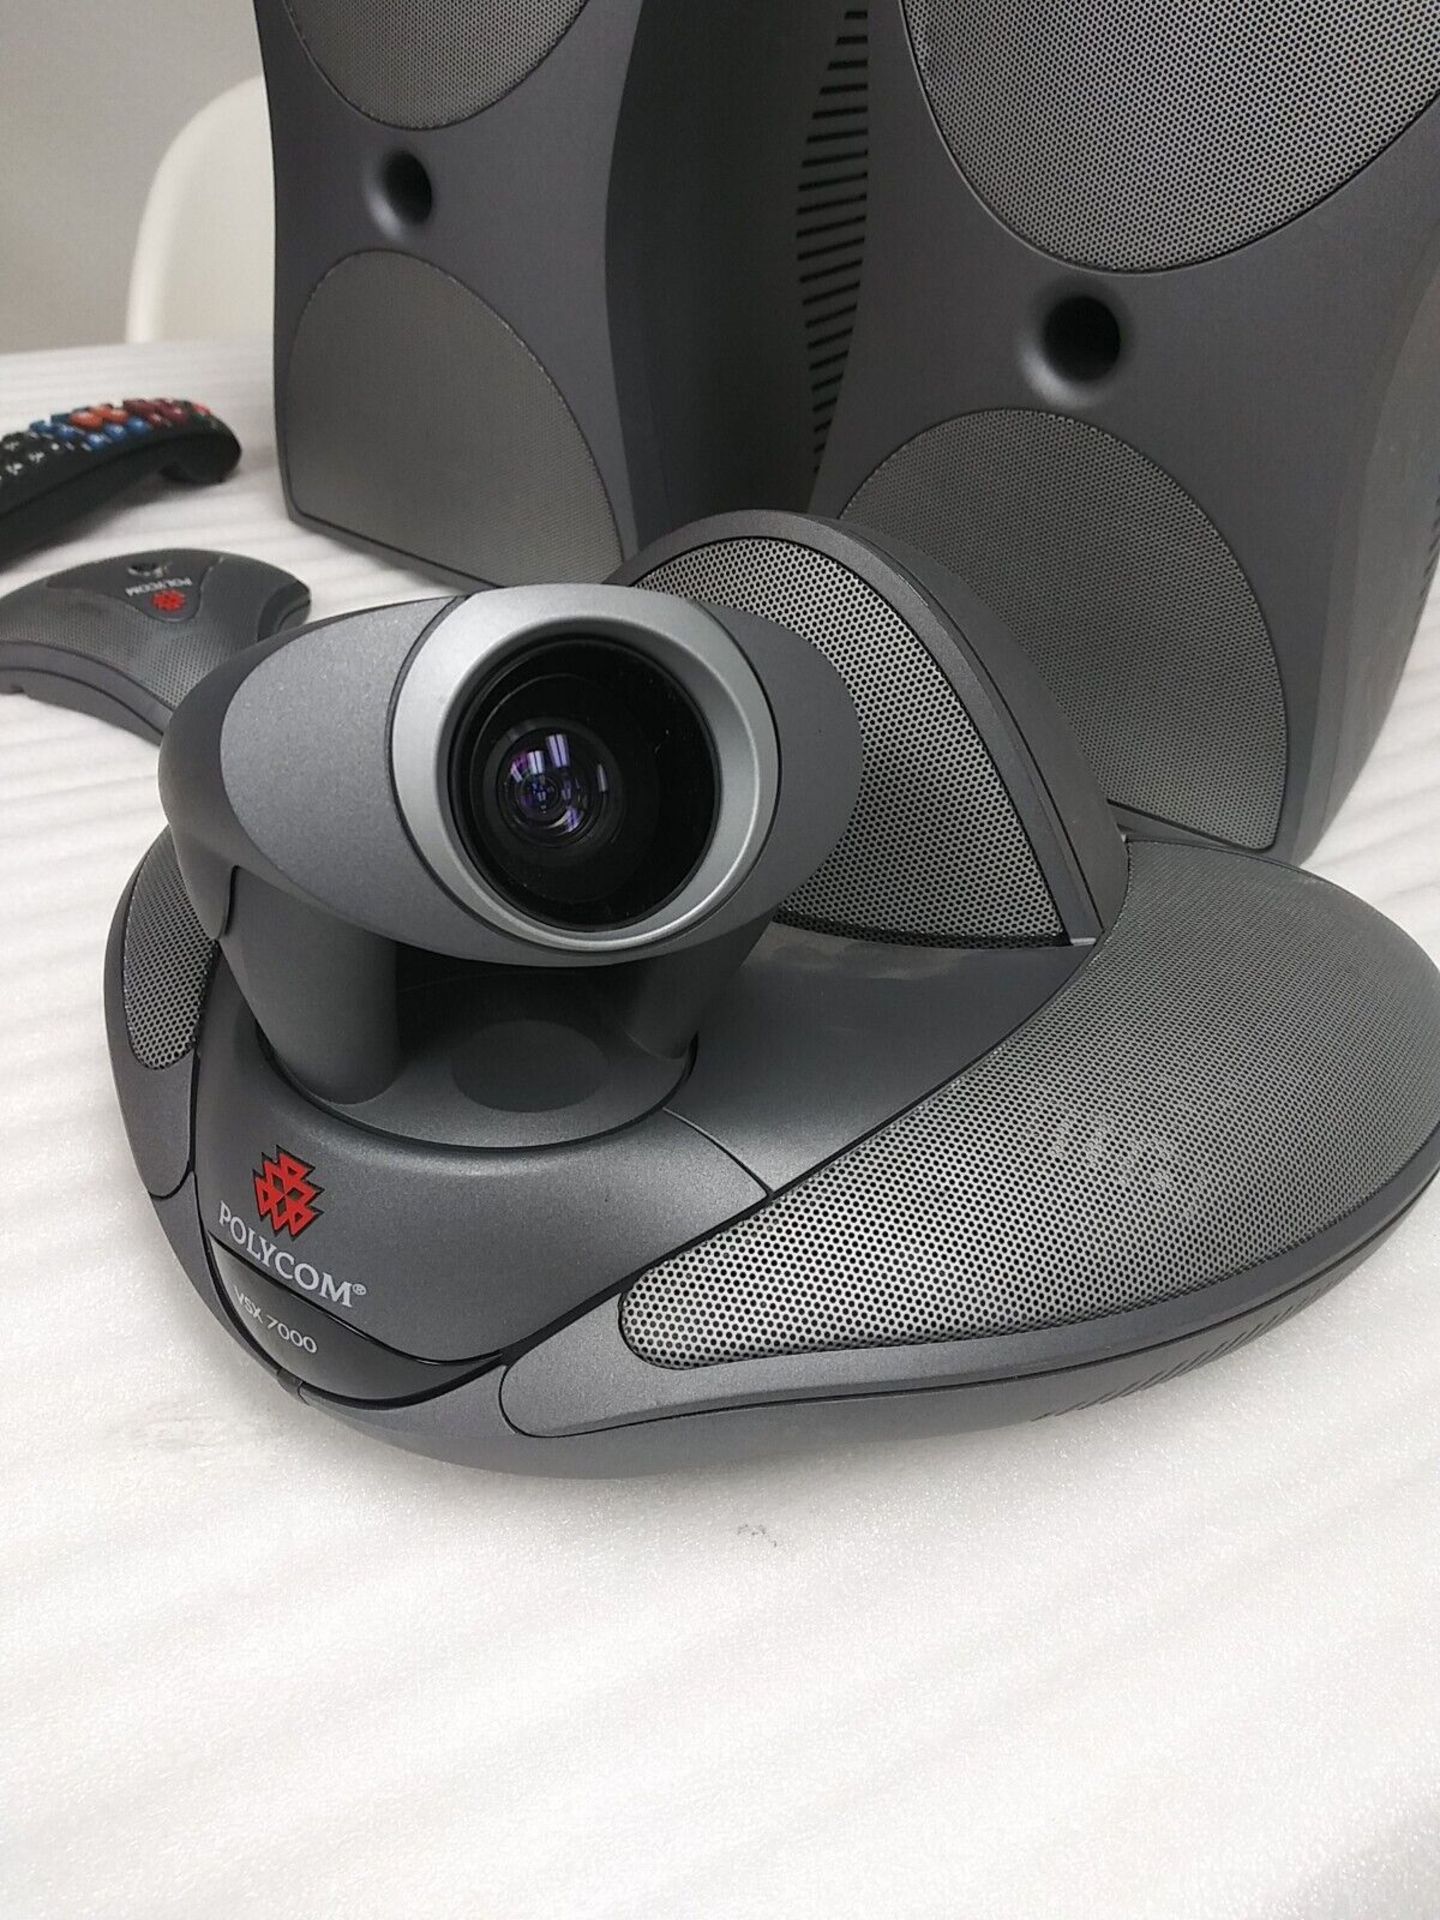 Polycom VSX 7000 Video Conferencing System Camera Microphone w/ 2 Subwoofers - Image 3 of 7